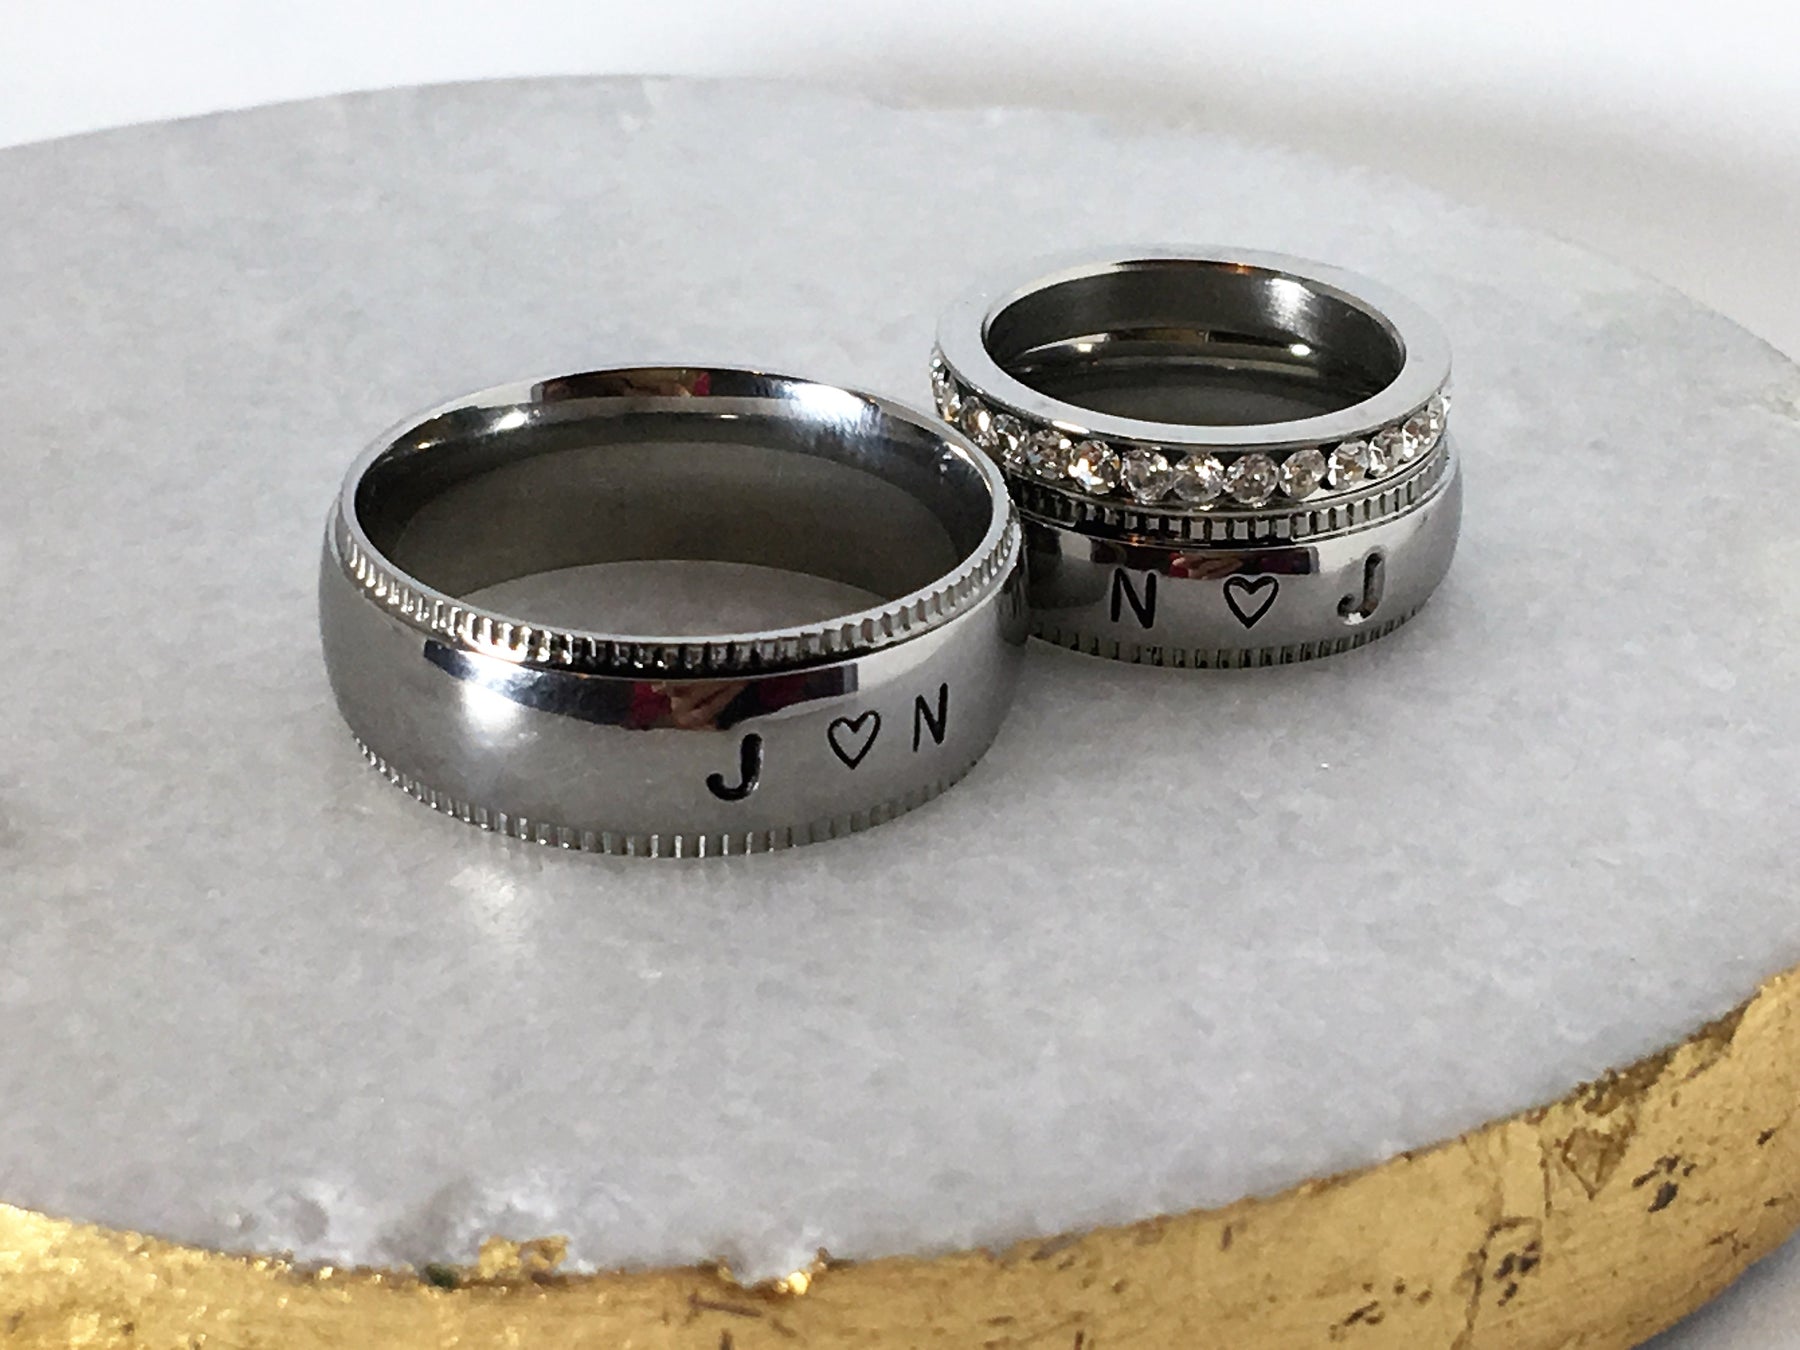 Couple Rings, Rings for Boyfriend, Girlfriend Gift, Anniversary Gift, Initials  Ring, Initial Rings, Jewelry for Couples, Customize Rings - Etsy | Ring for  boyfriend, Girlfriend gifts, Initial ring